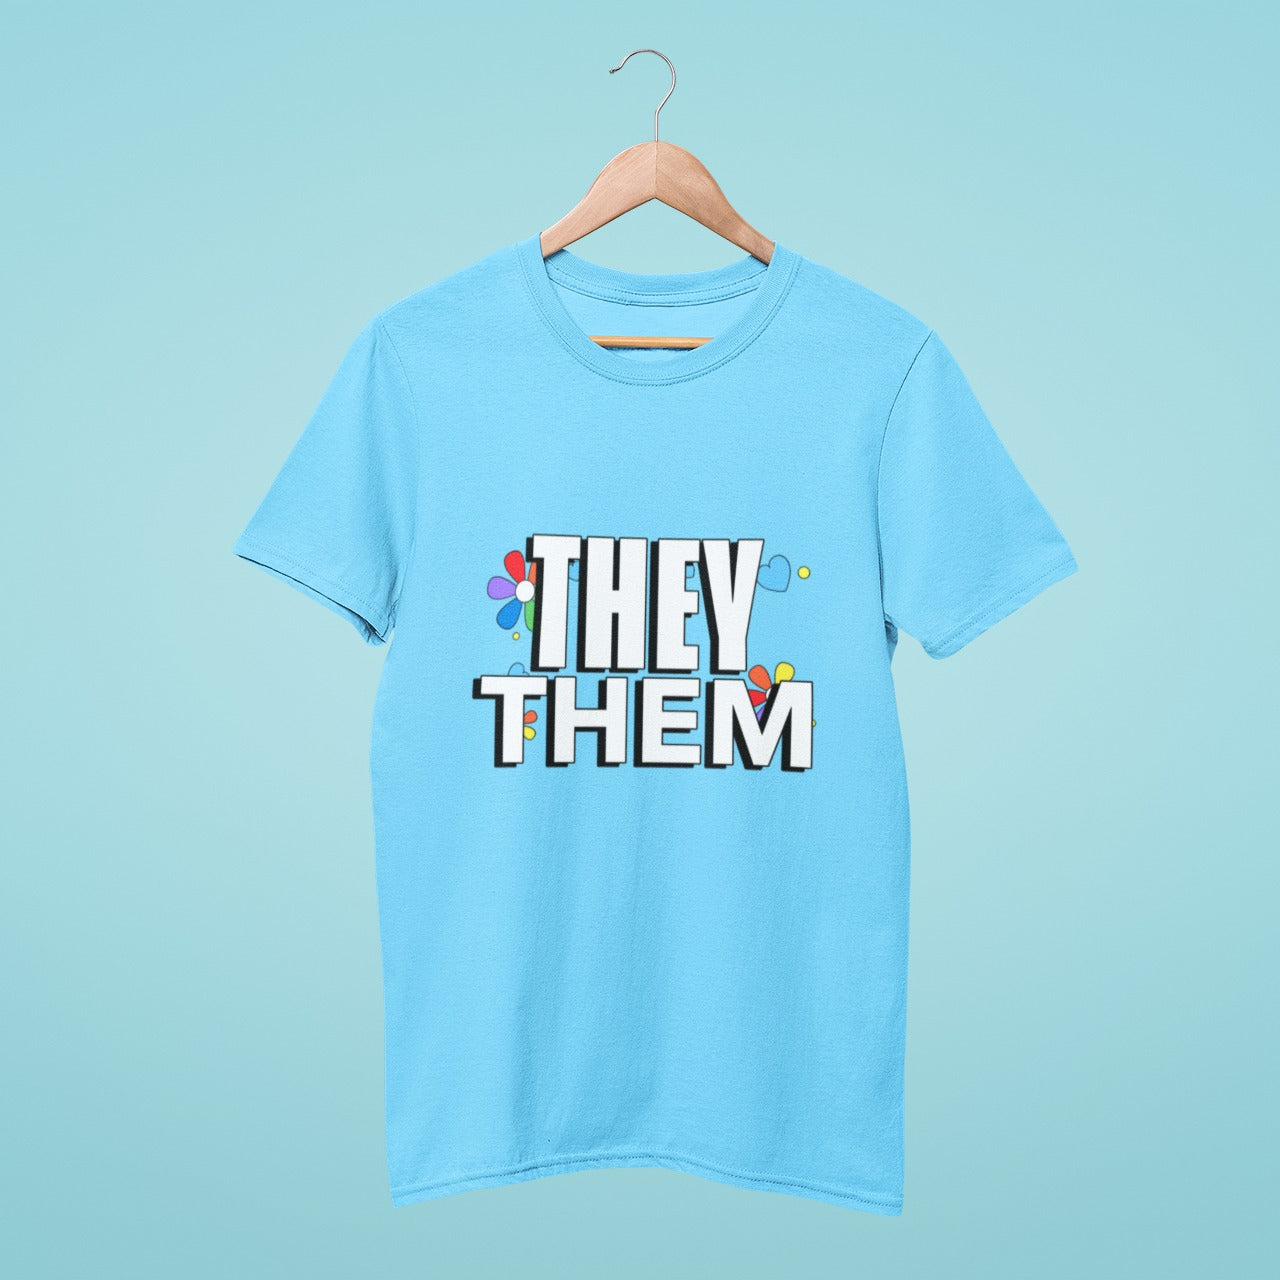 Our sky blue round neck t-shirt features a 'They Them' design with beautiful rainbow flowers in the background, making it a perfect addition to your wardrobe. Show your support for gender-neutral pronouns while staying stylish and comfortable. Made with high-quality materials and available in various sizes, order now to spread positivity and inclusivity.